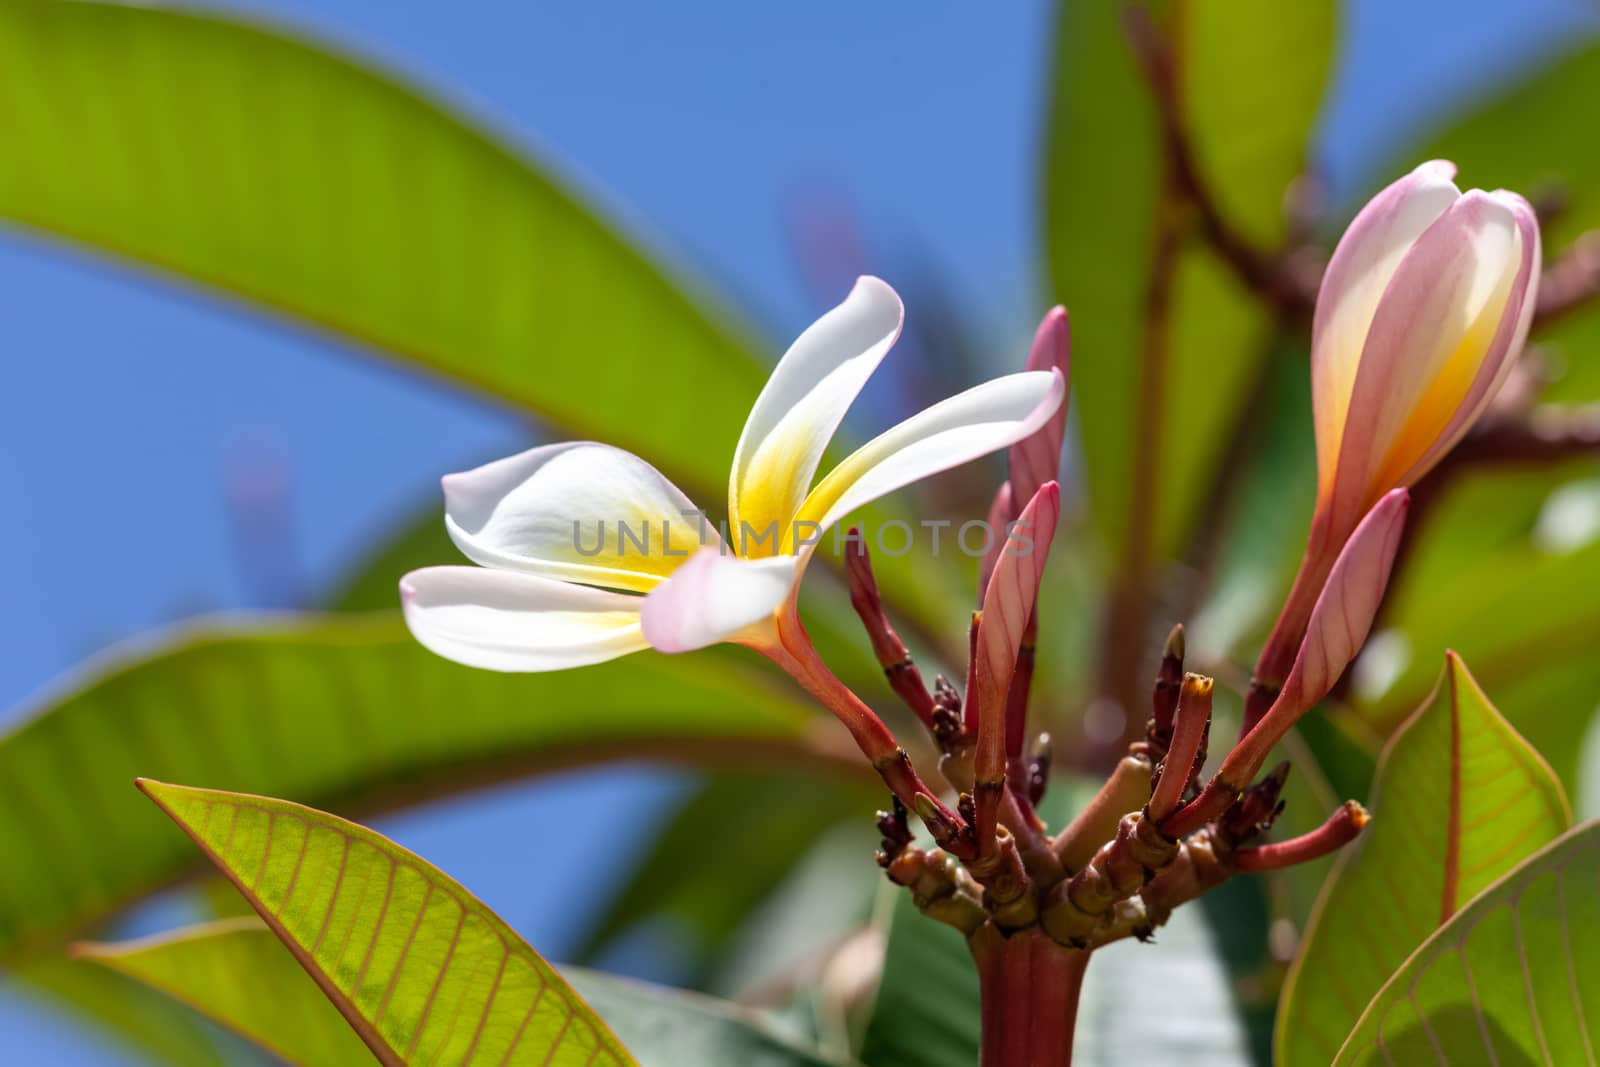 An image of a white and yellow frangipani flower